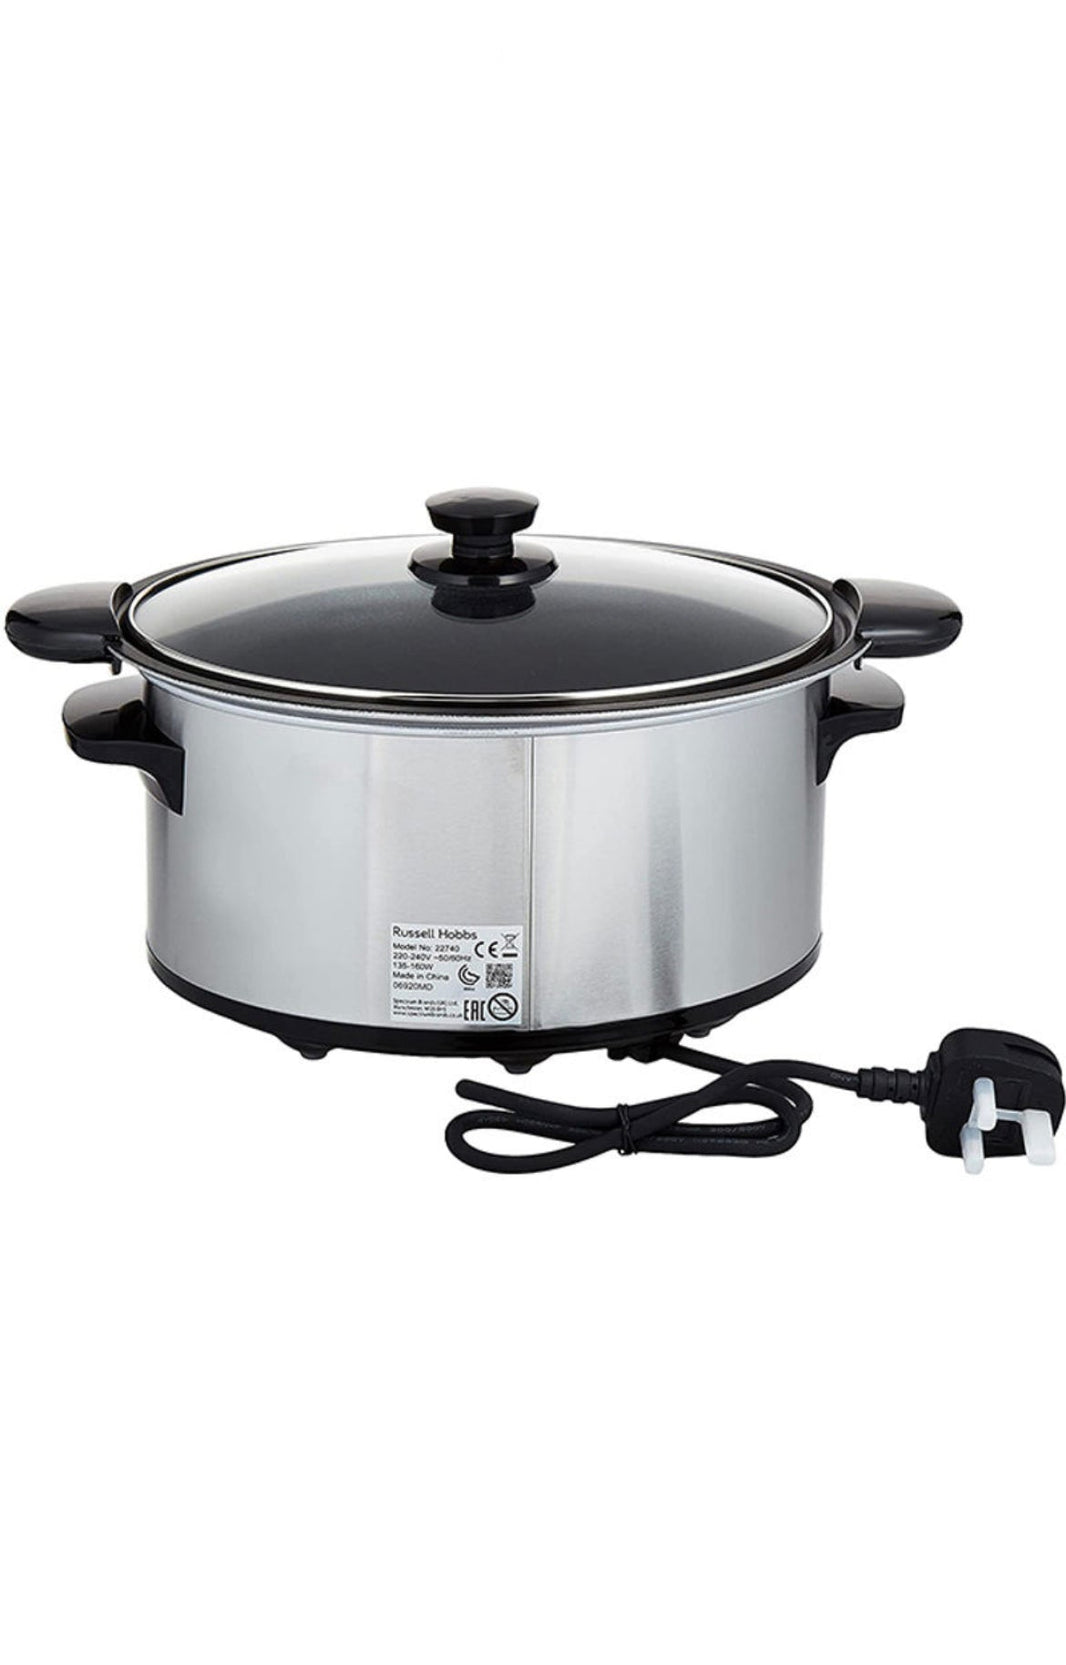 Russell Hobbs Searing Slow Cooker 3.5 l 160 W 22740 Silver